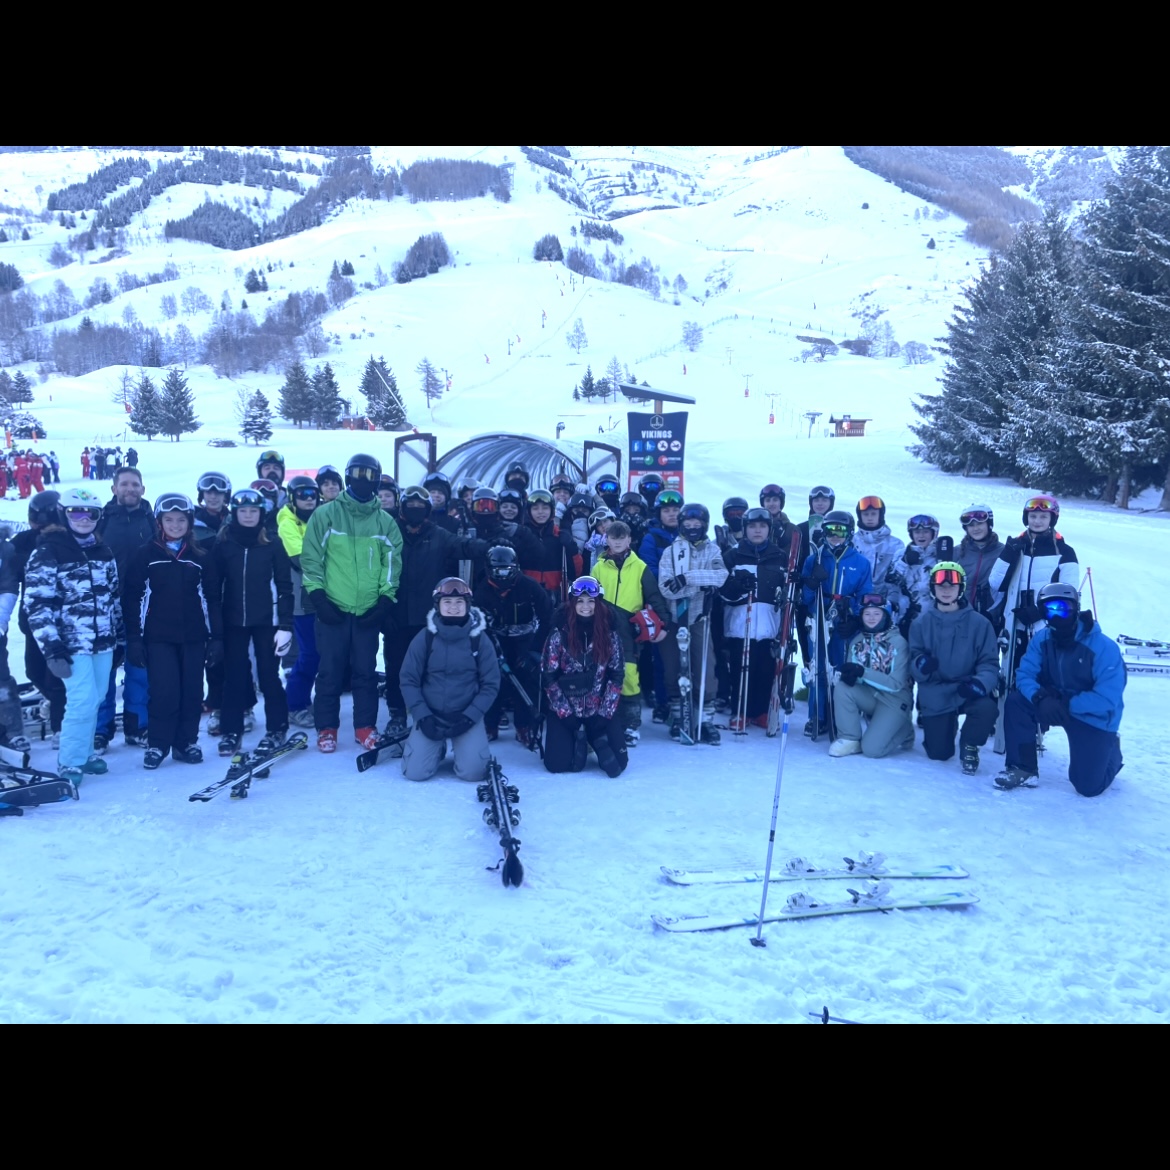 Group photograph, on slopes